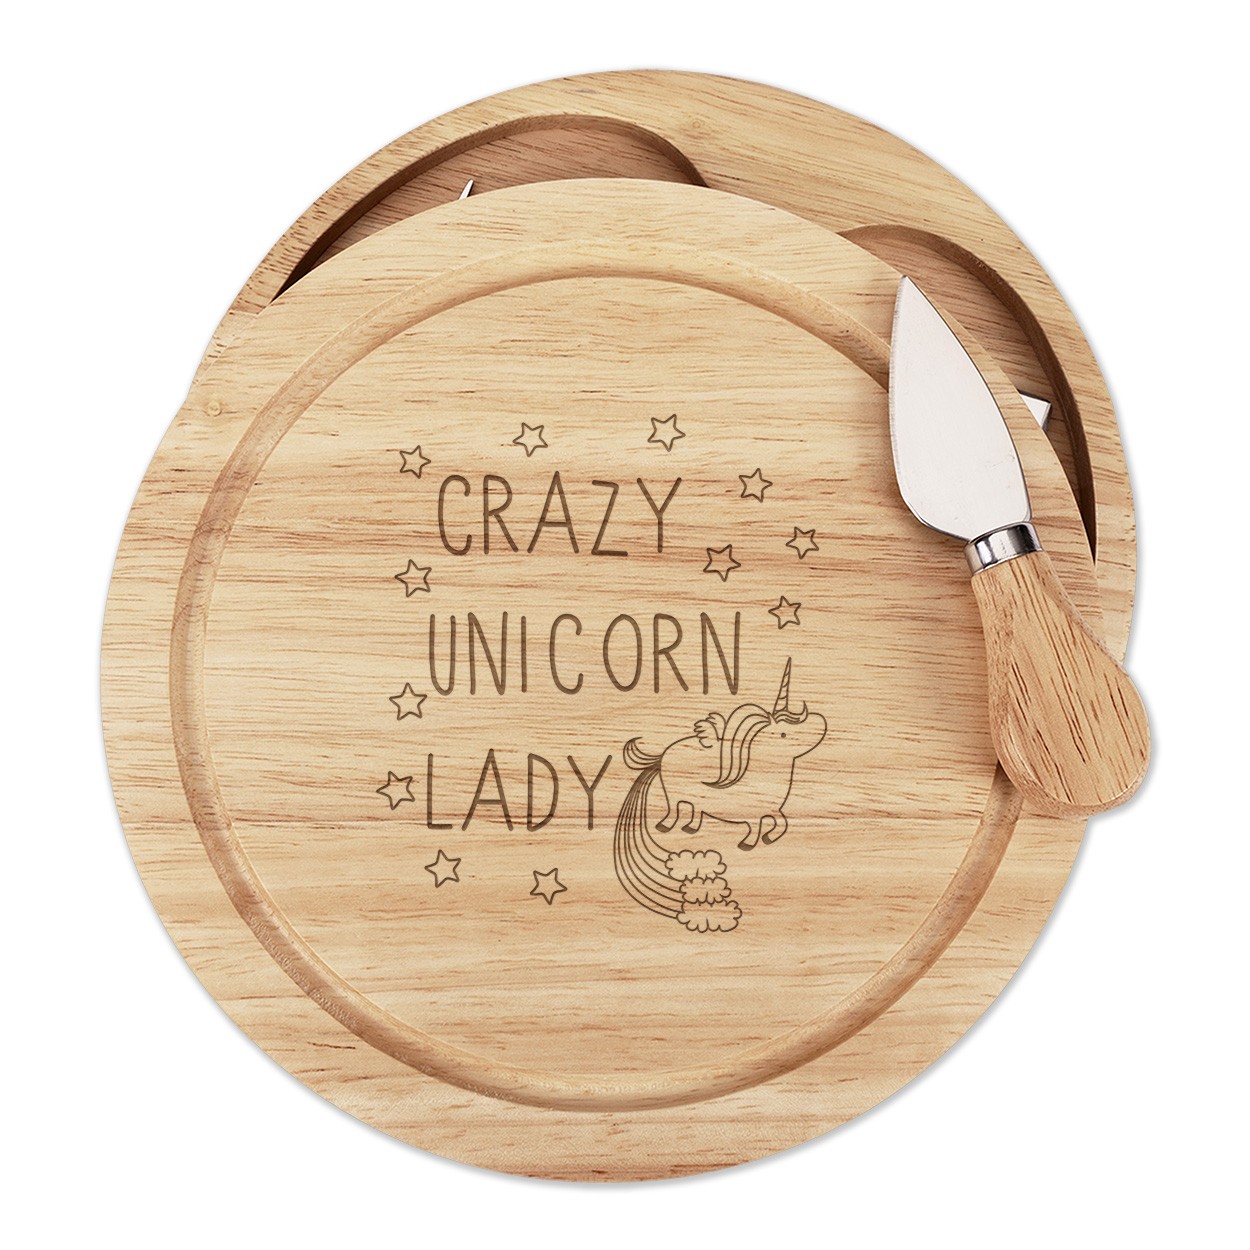 Crazy Unicorn Lady Wooden Cheese Board Set 4 Knives